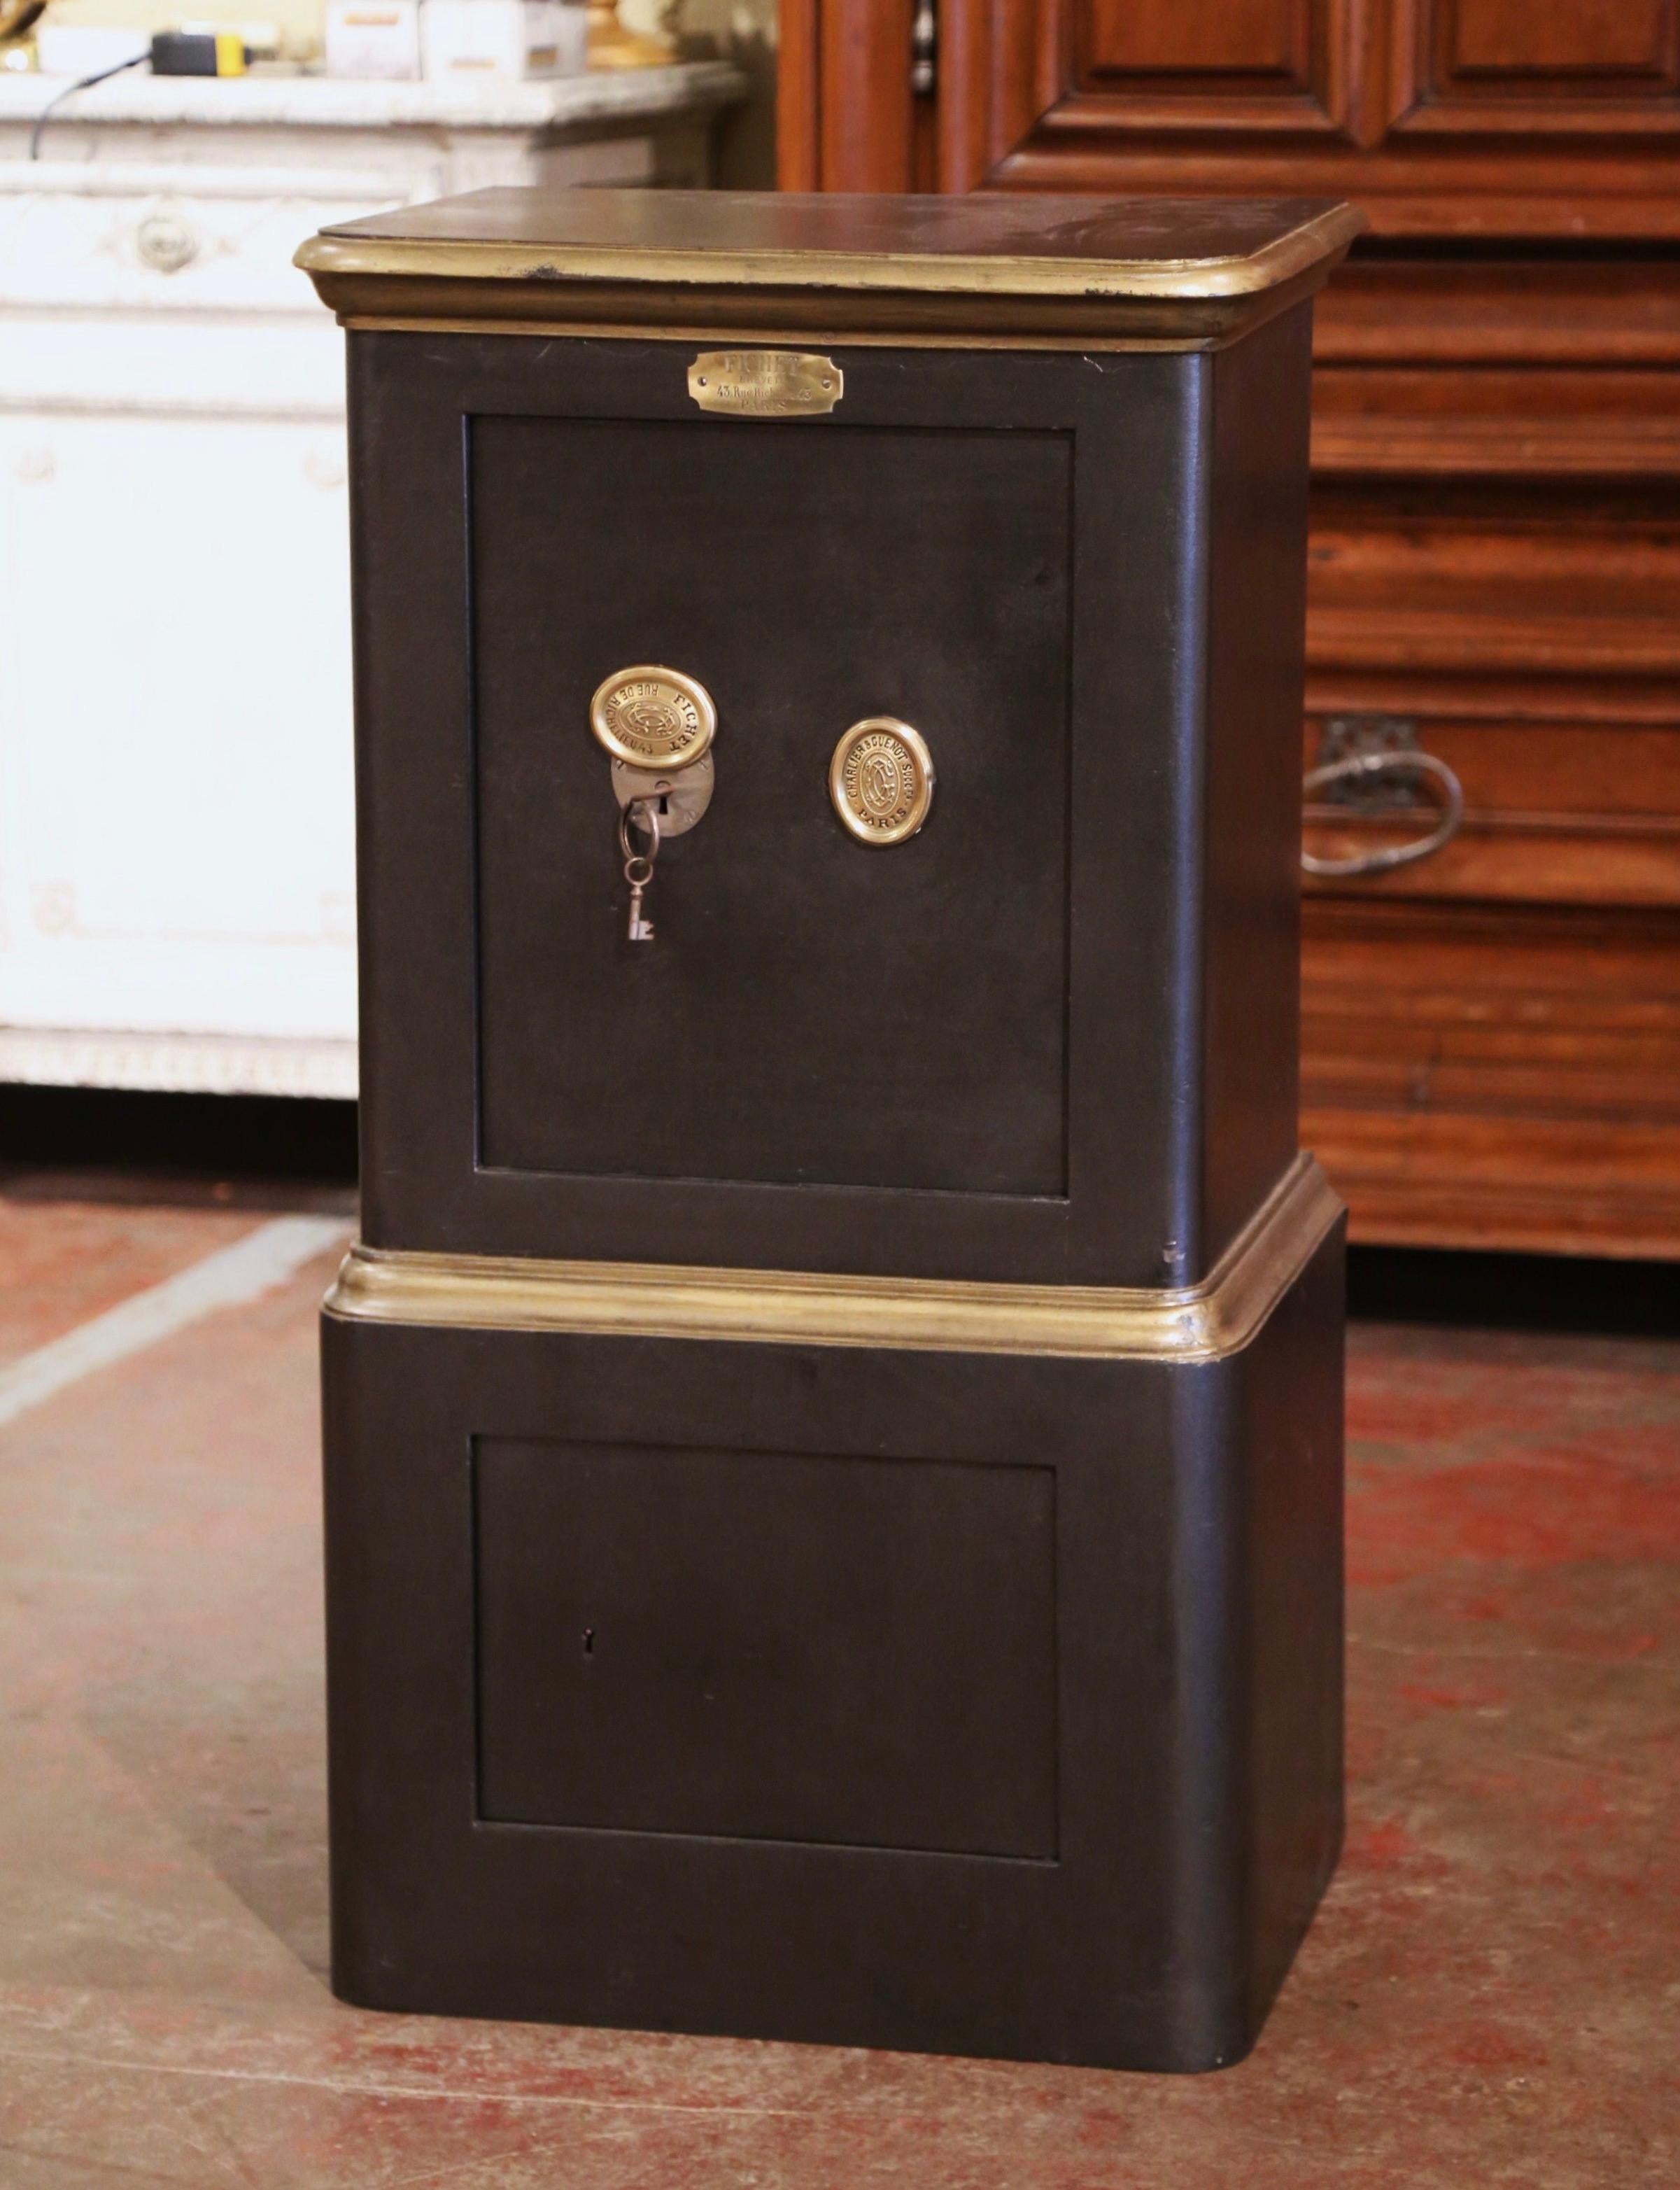 This antique iron safe, with secret combination, was crafted in Paris France, circa 1860. The black and gilt painted safe is dressed with a three bronze medallions (including one covering the key entry), which read: 